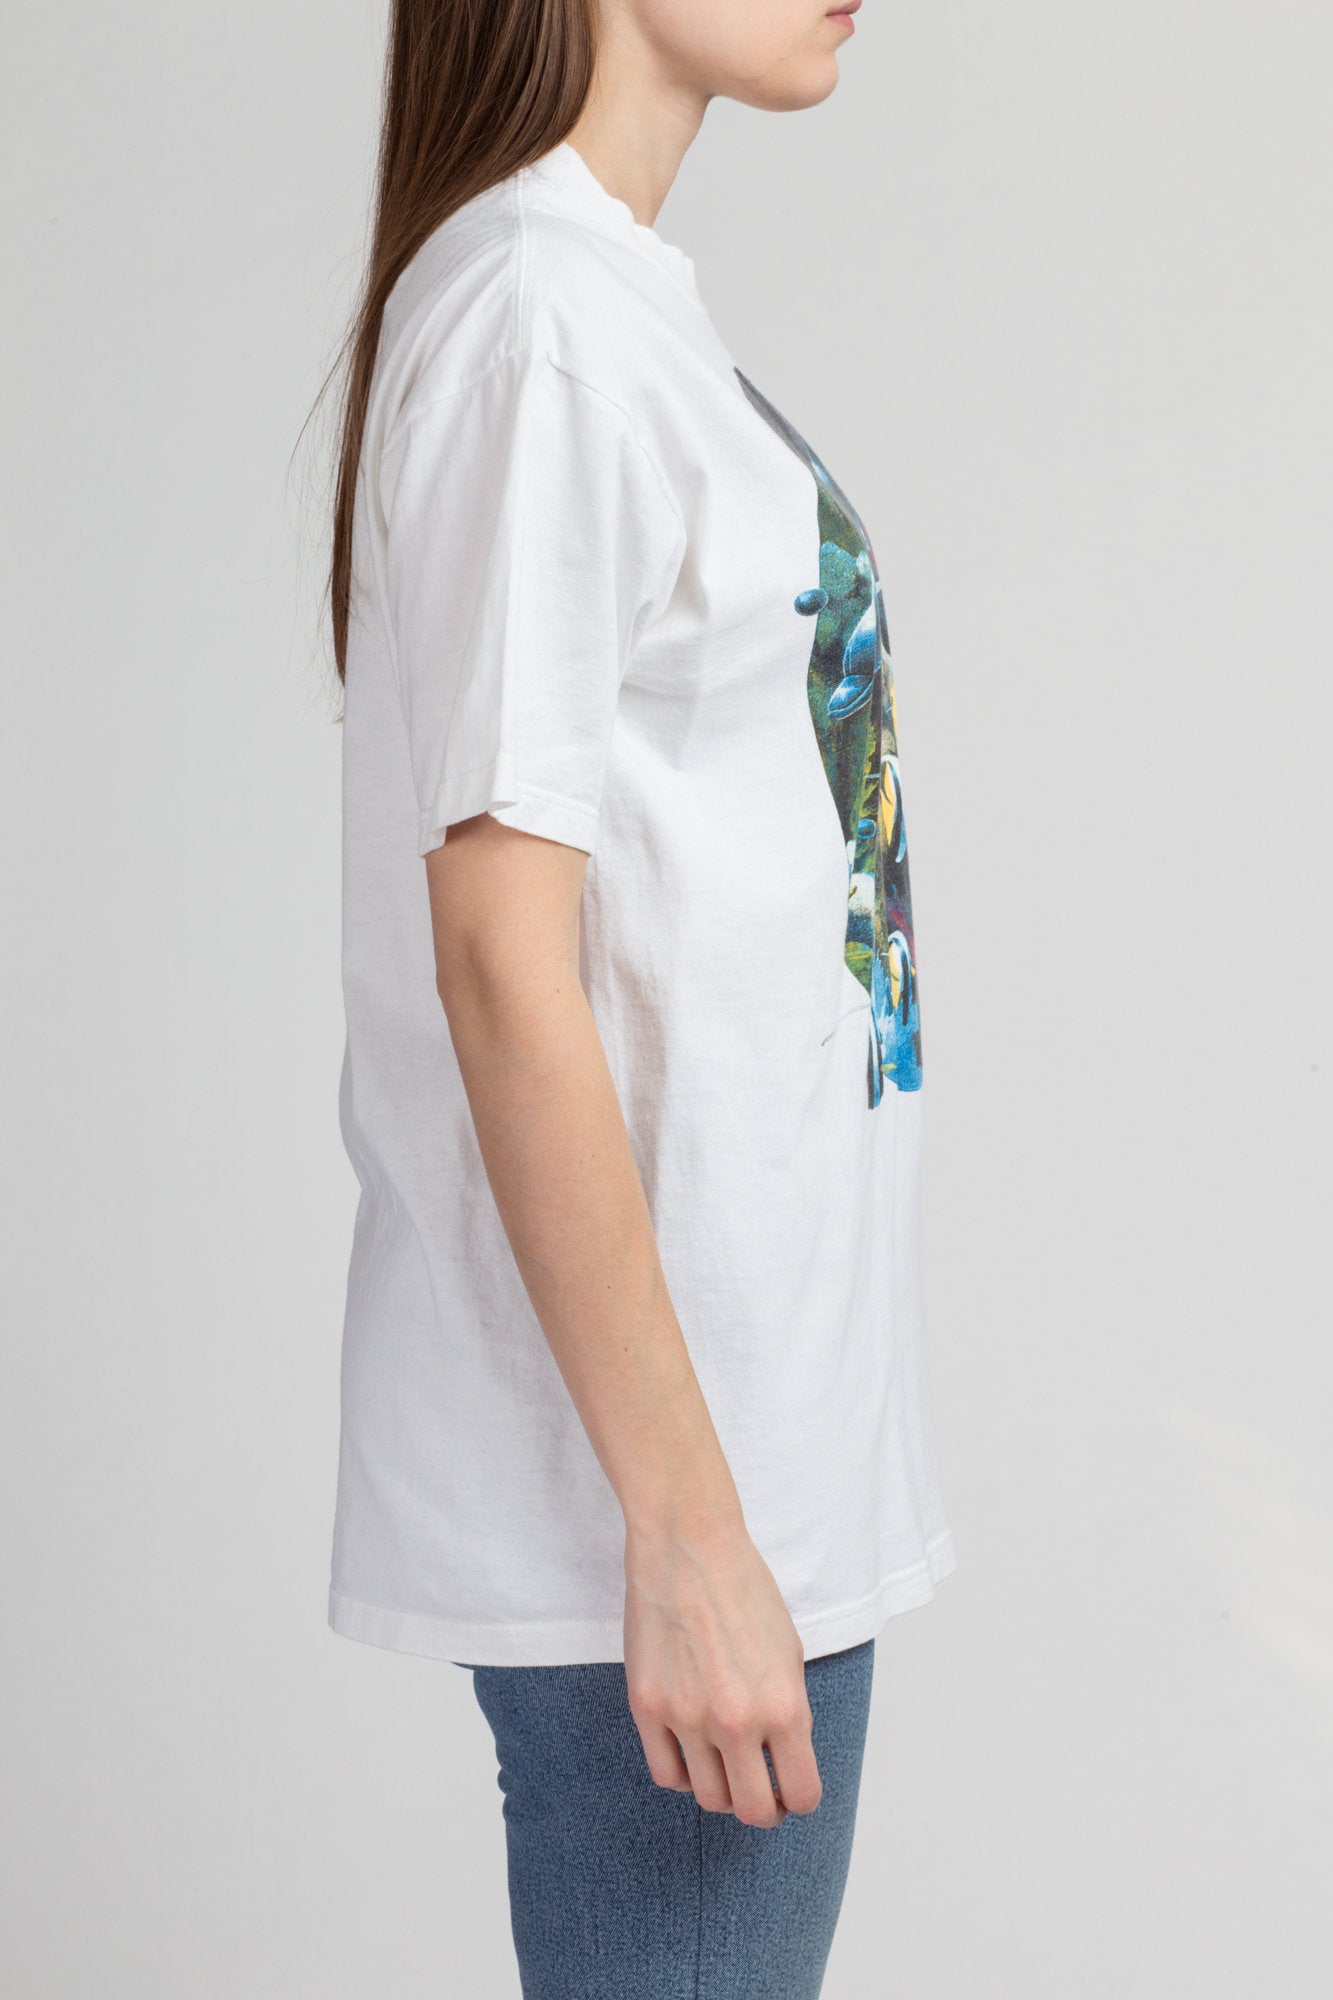 90s Dolphin Graphic Tee - Medium to Large | Vintage White Cotton Fish T Shirt